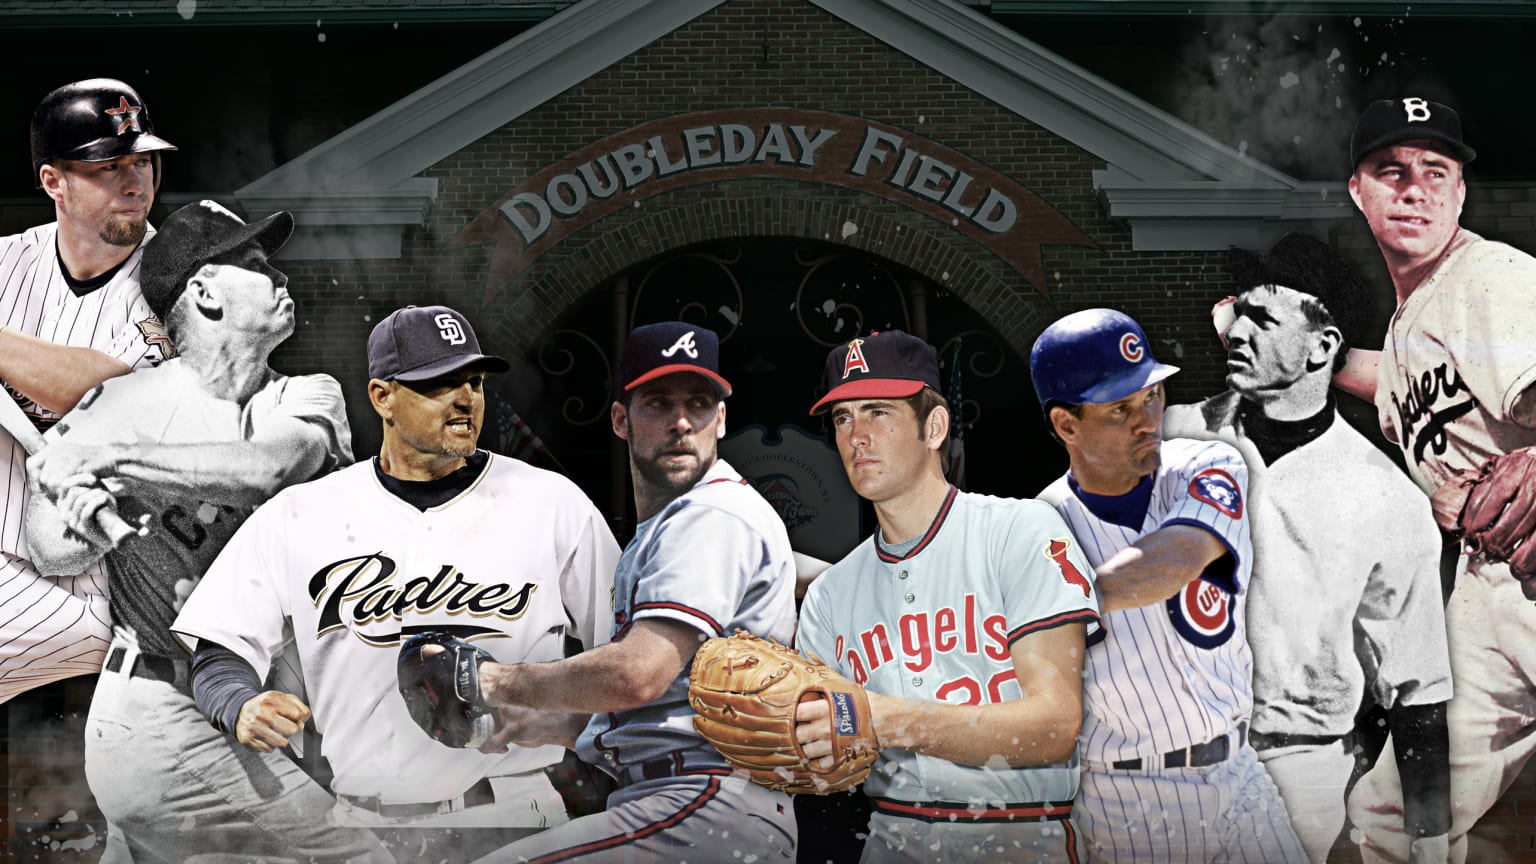 A photo illustration shows eight Hall of Fame players in front of Doubleday Field in Cooperstown